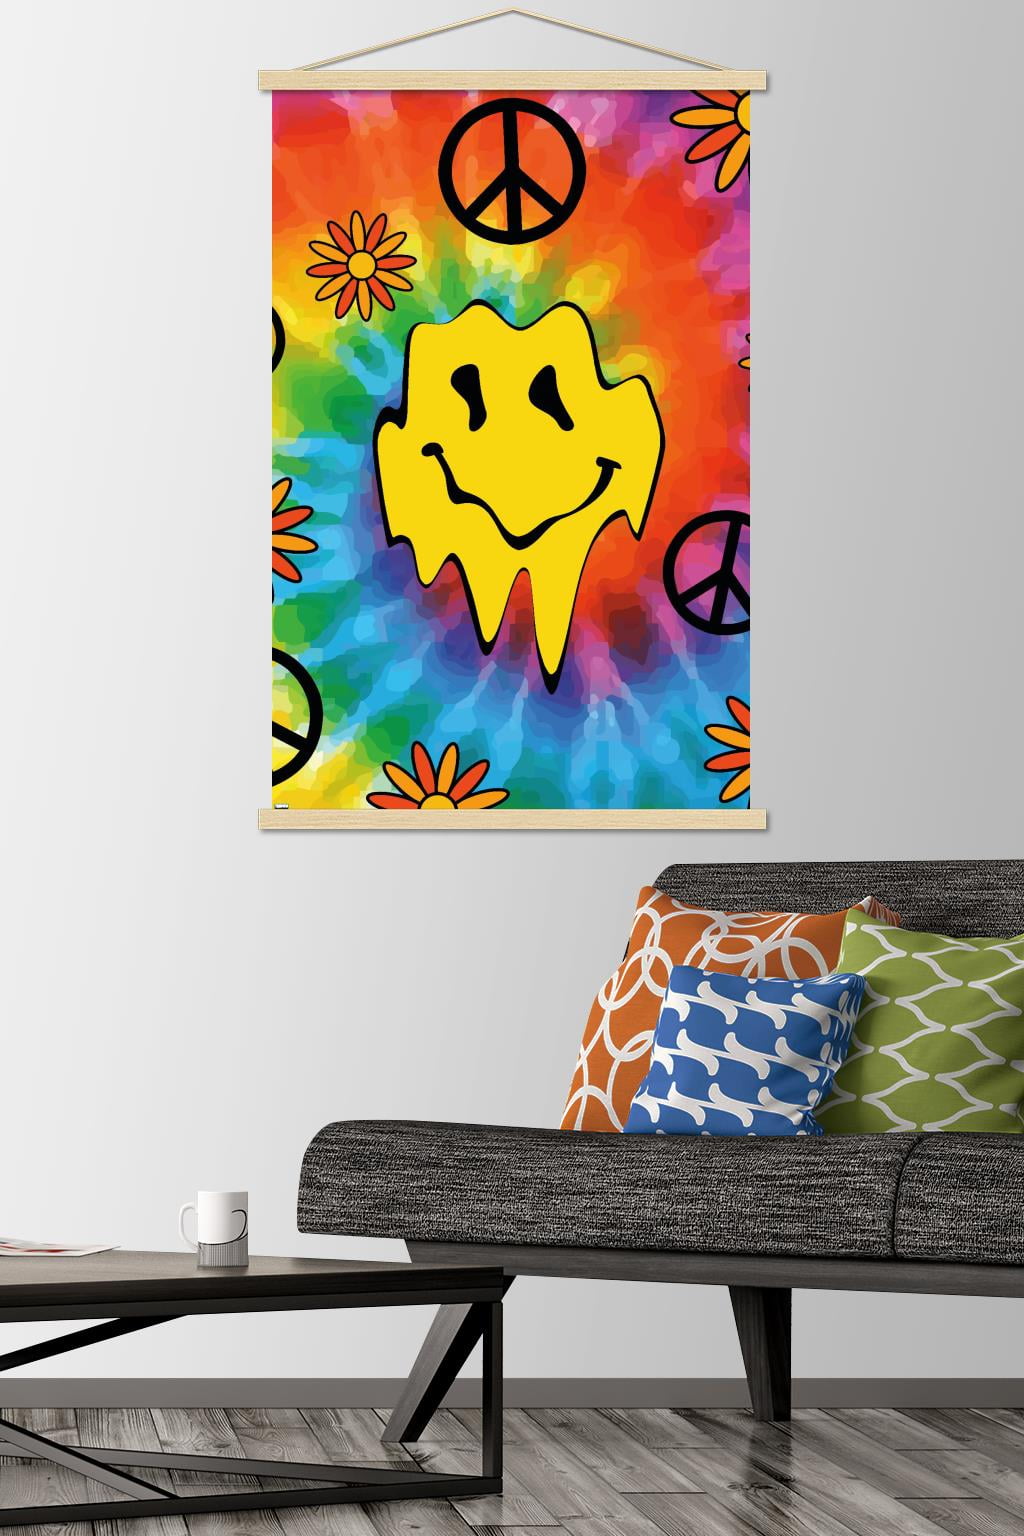 Groovy Melting Smile Face Wall Poster, 22.375\